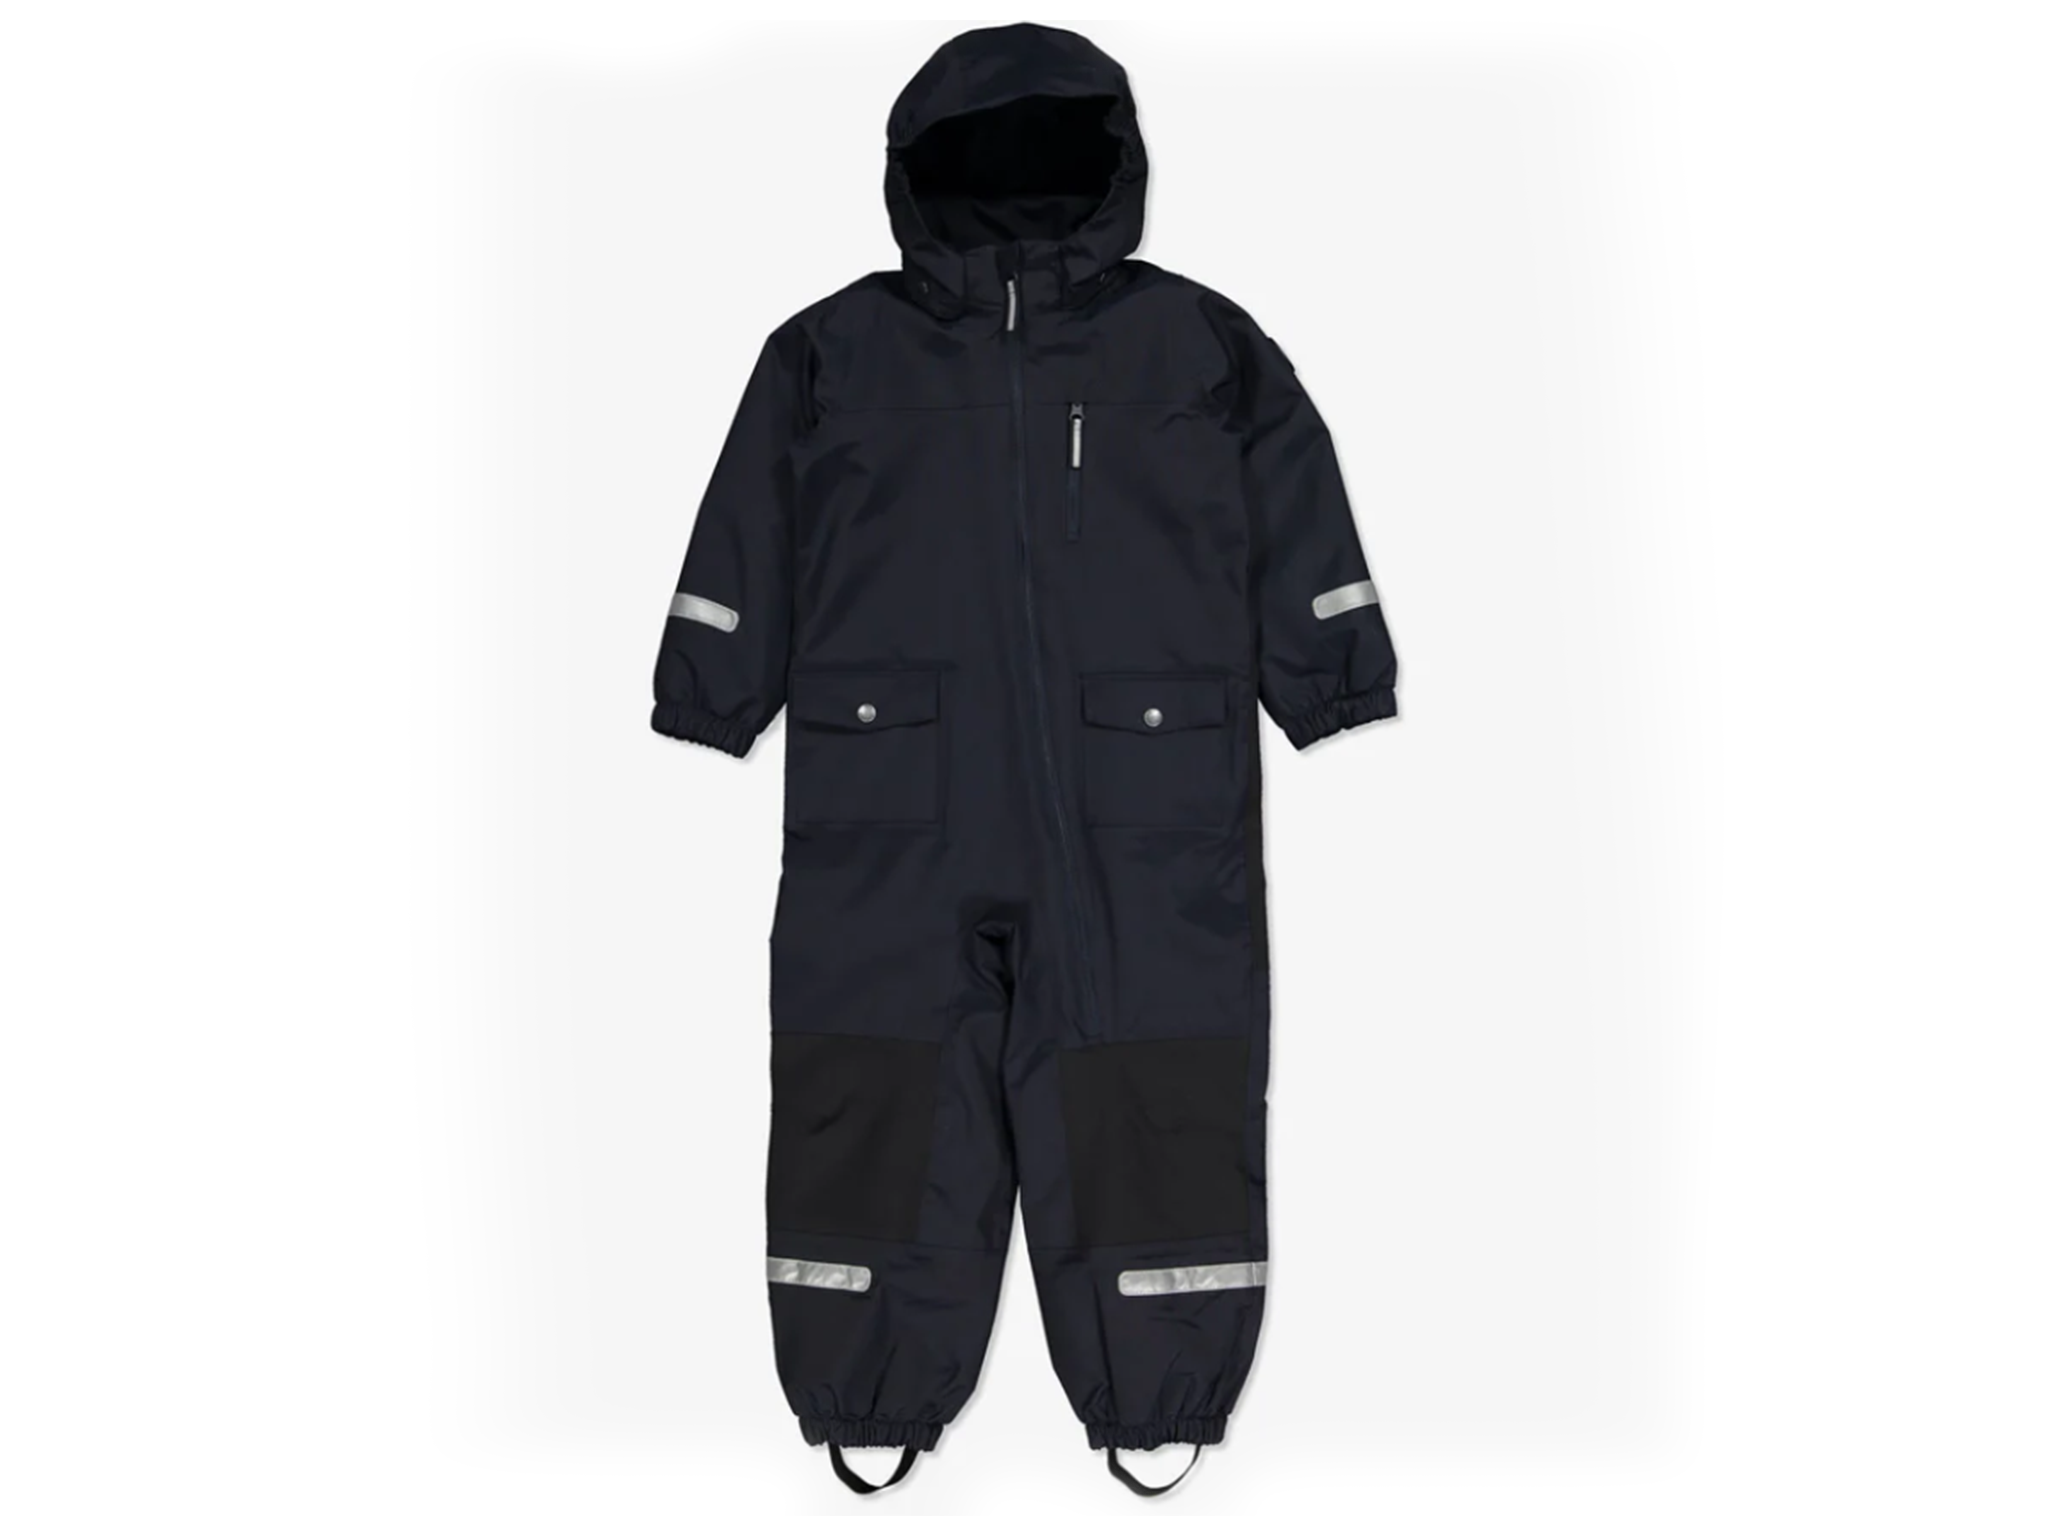 best baby snowsuits indybest polarn O. Pyret waterproof shell fleece lined kids overall